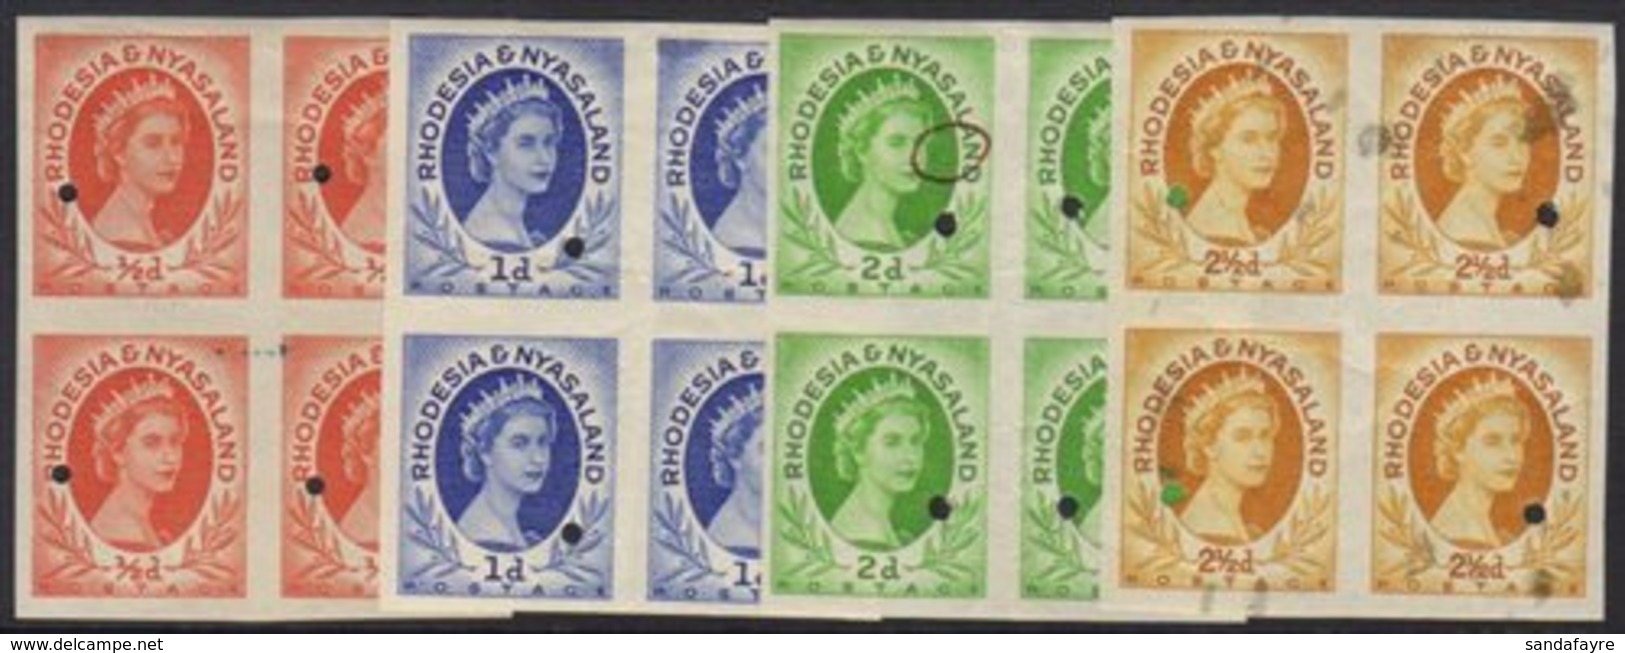 1954-56 Imperf Plate Proof Blocks Of Four ½d, 1d, 2d And 2½d, Mint Or Never Hinged Mint, With Archive Security Punch Hol - Rhodesien & Nyasaland (1954-1963)